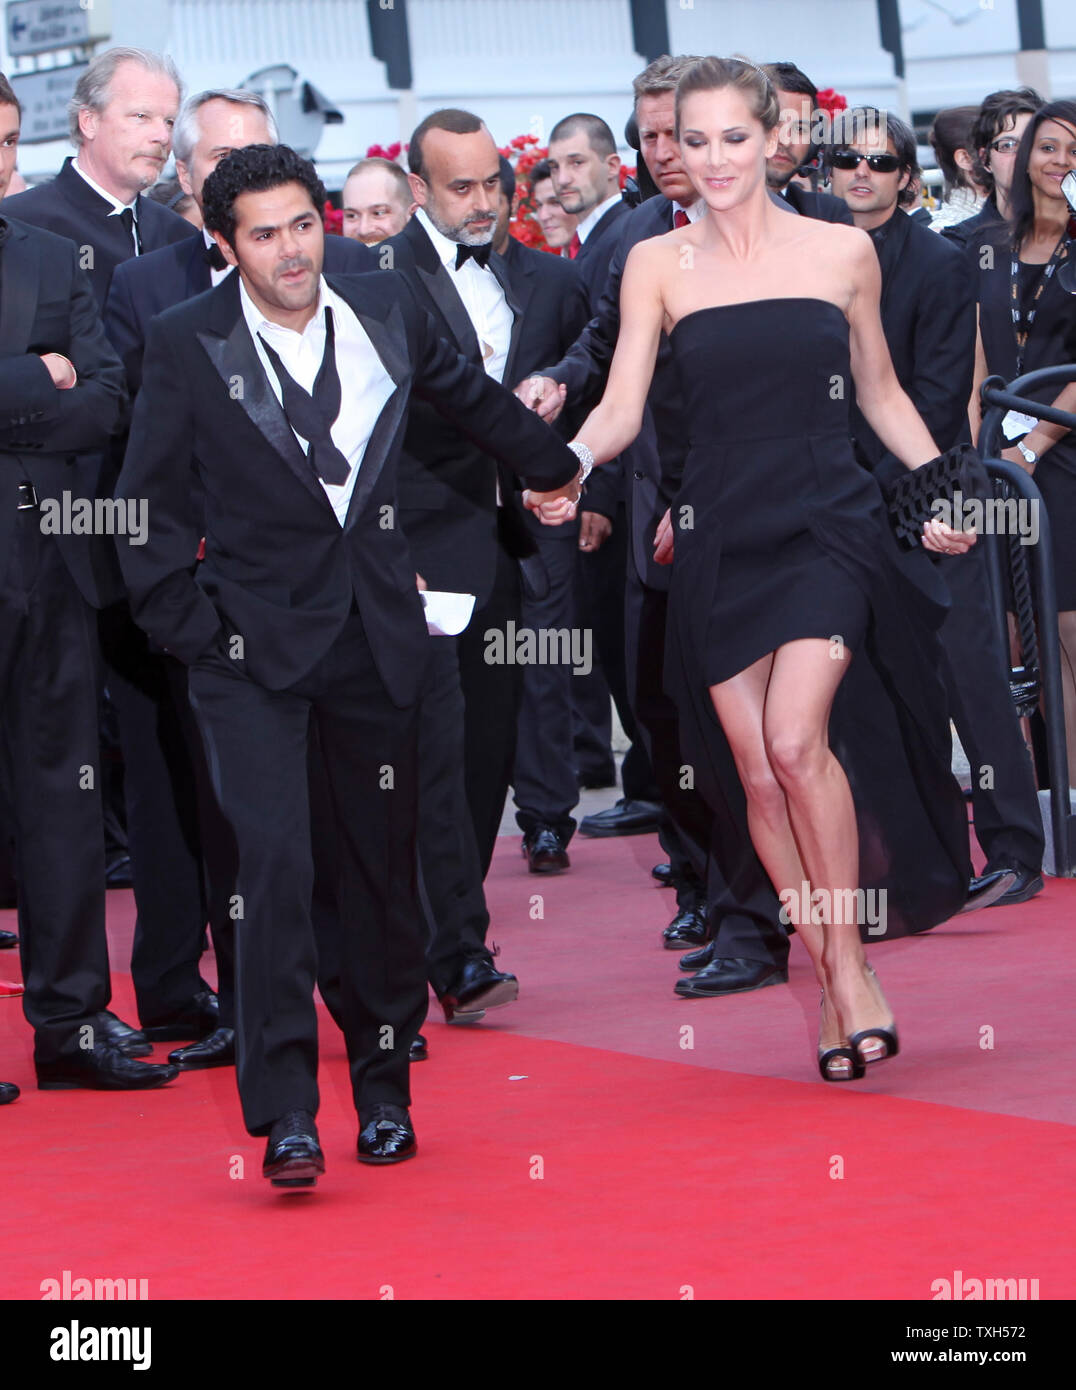 Jamel Debbouze and his wife Melissa Theuriau arrive on the red carpet before the screening of the film 'Hors La Loi (Outside of the Law)' during the 63rd annual Cannes International Film Festival in Cannes, France on May 21, 2010.  UPI/David Silpa Stock Photo